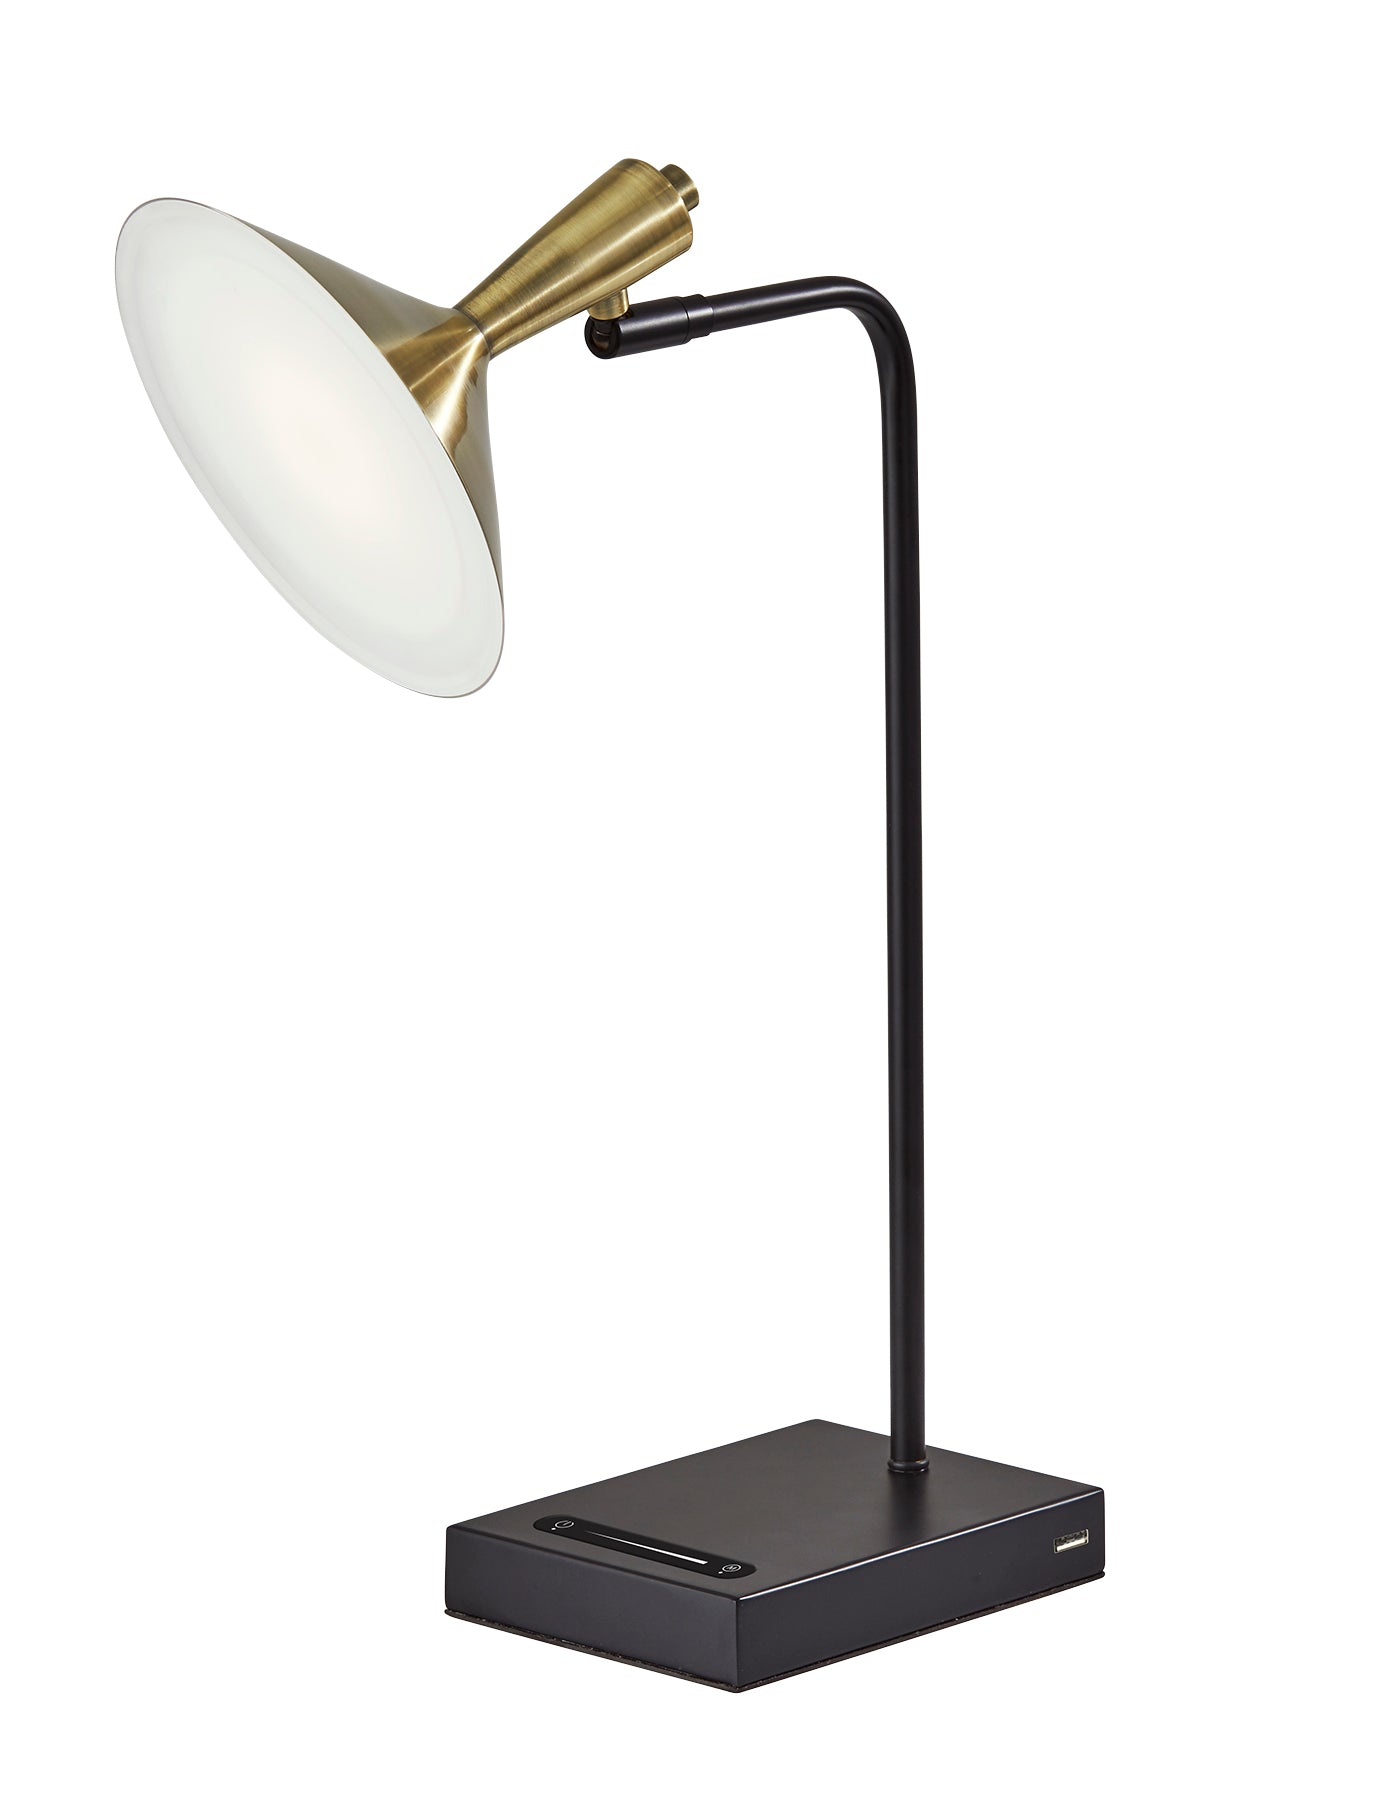 LUCAS Table lamp Black, Gold INTEGRATED LED - 4262-01 | ADESSO